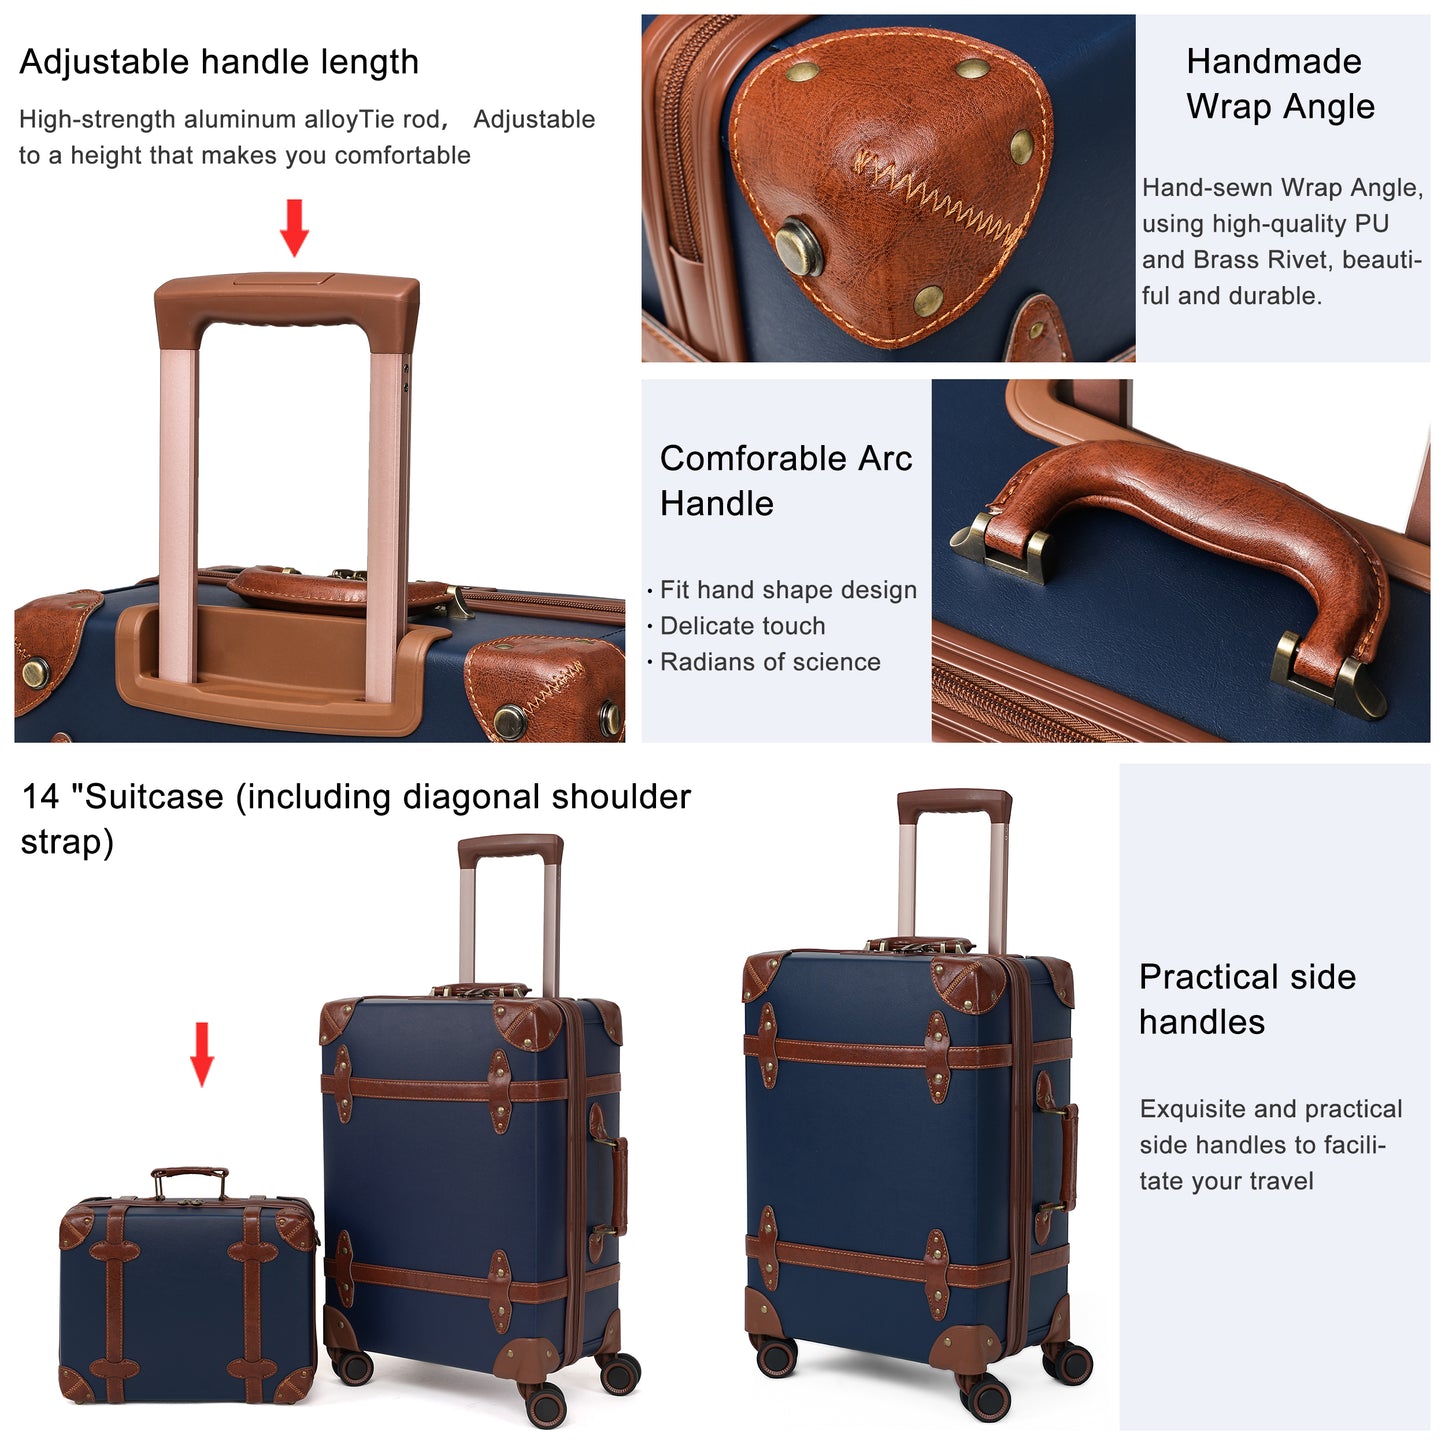 NZBZ 3 Pieces Vintage Luggage Set Carry On Cute Suitcase with Rolling Spinner Wheels and Tsa Lock Retro Trunk luggage